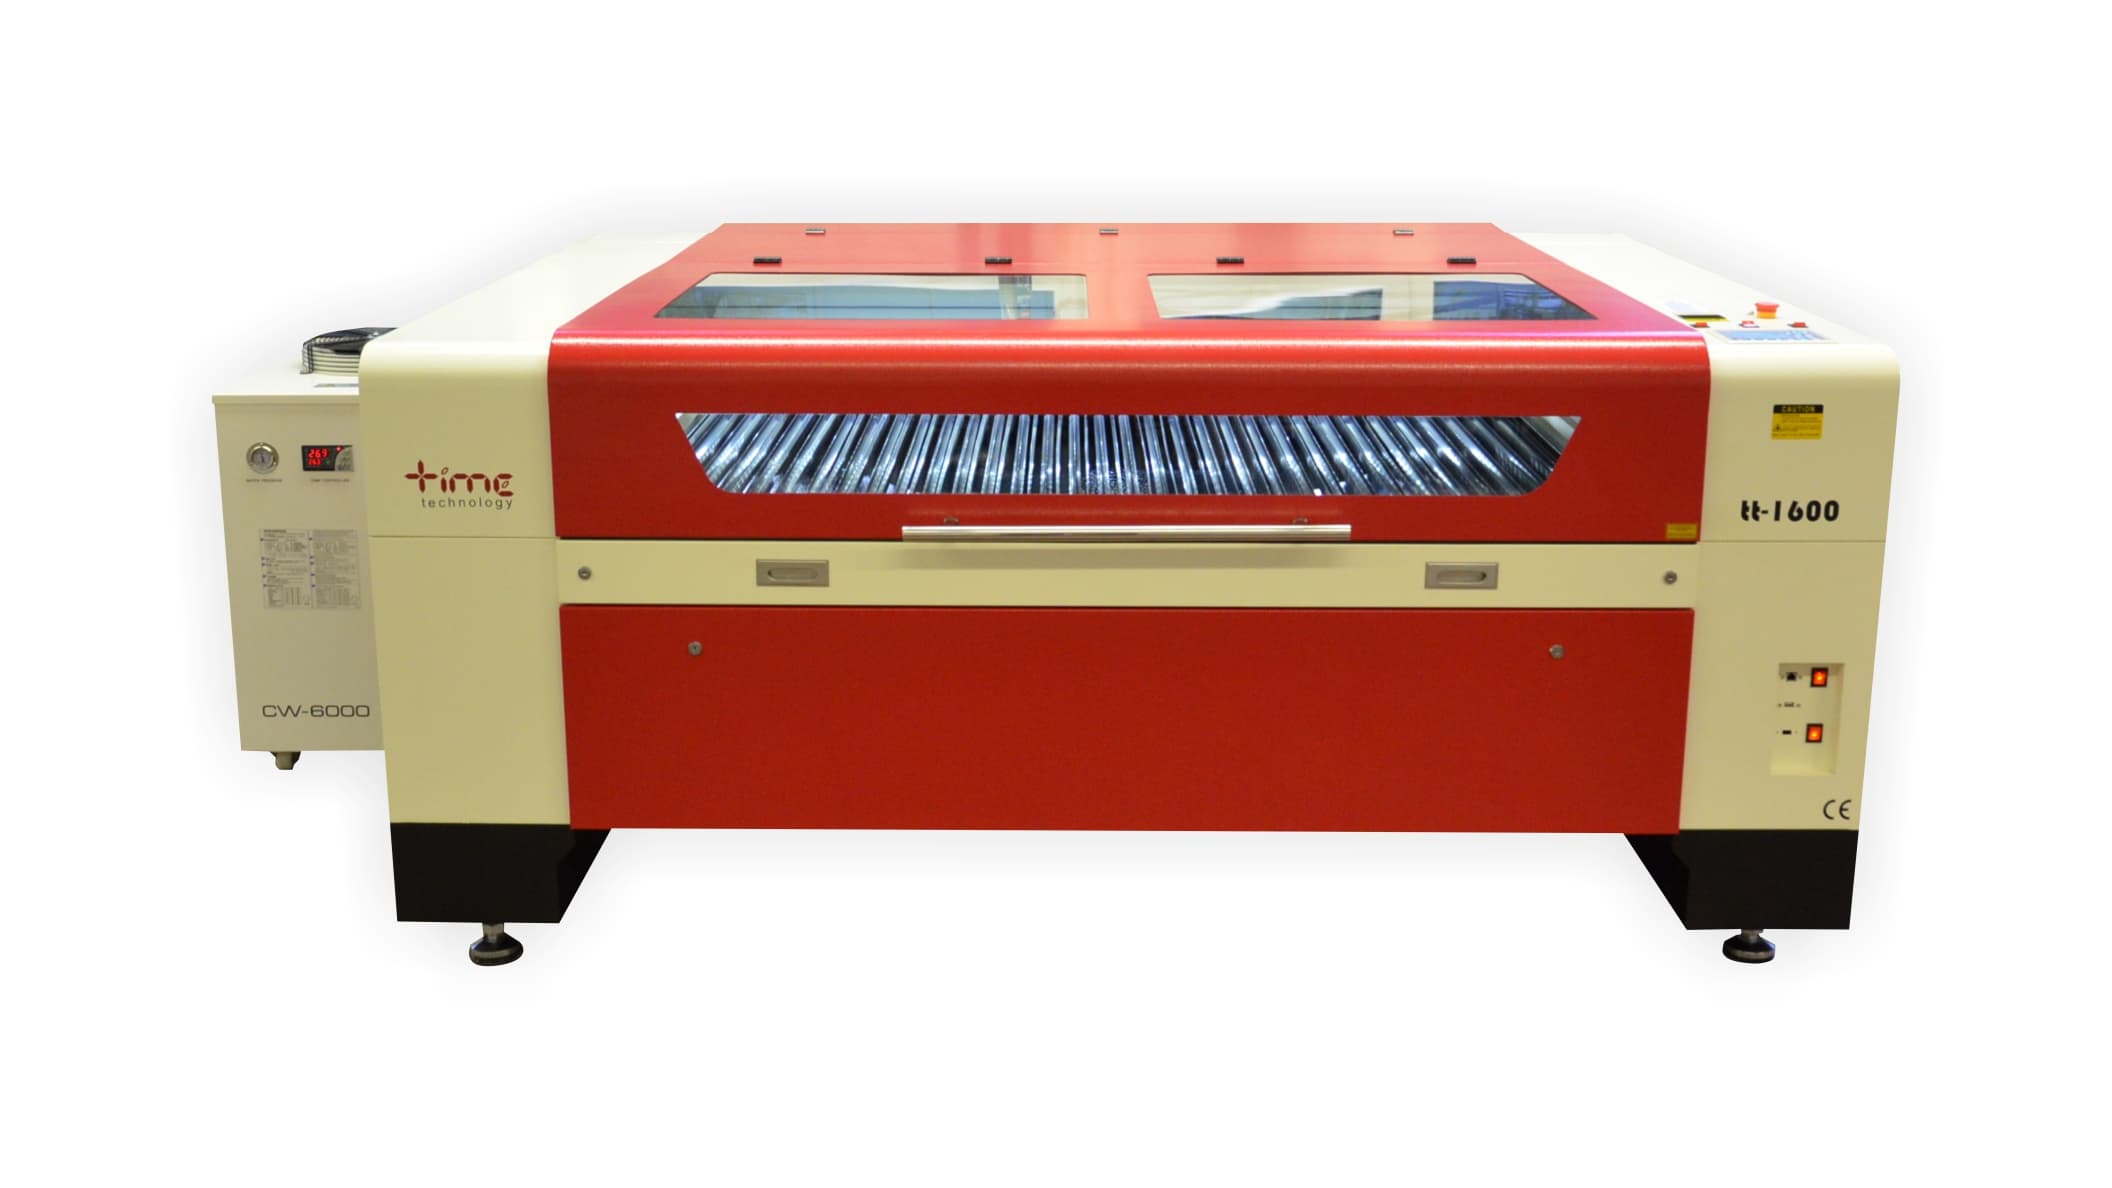 tt1600 has an ideal size (1.6 x 1 m) for example acrylic glass processing. All around hinged